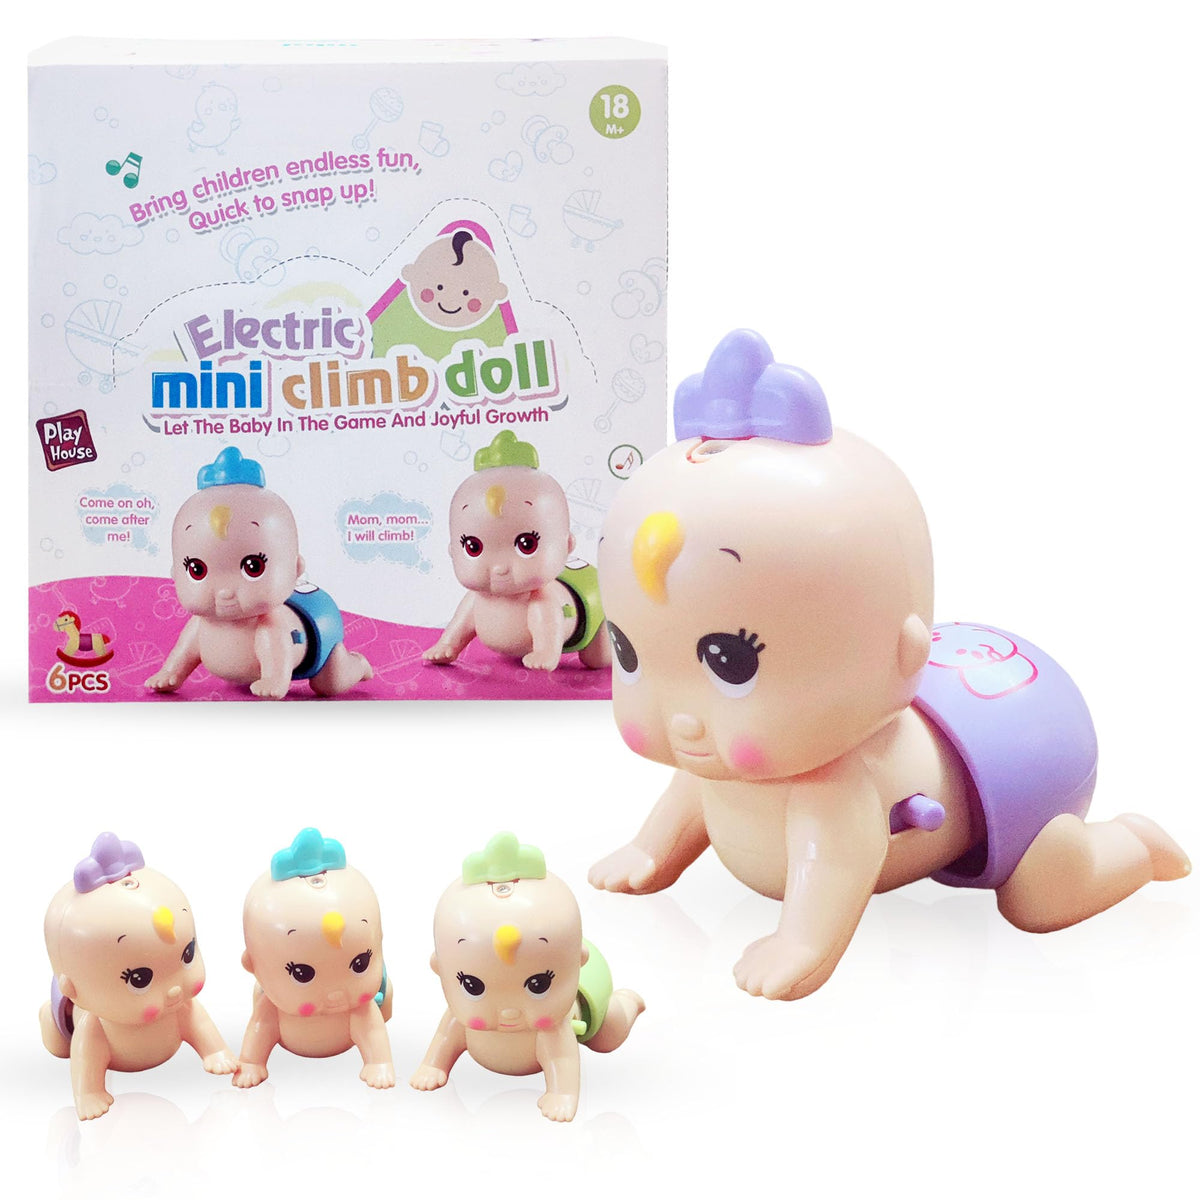 FunBlast Cute Baby Crawling Toy for Kids - Electric Mini Climb Doll, Crawling Baby Toy with Musical Sound, Sound Toys for 18+ Months Kids, Boys, Girls (Pack of 1; Random Color)